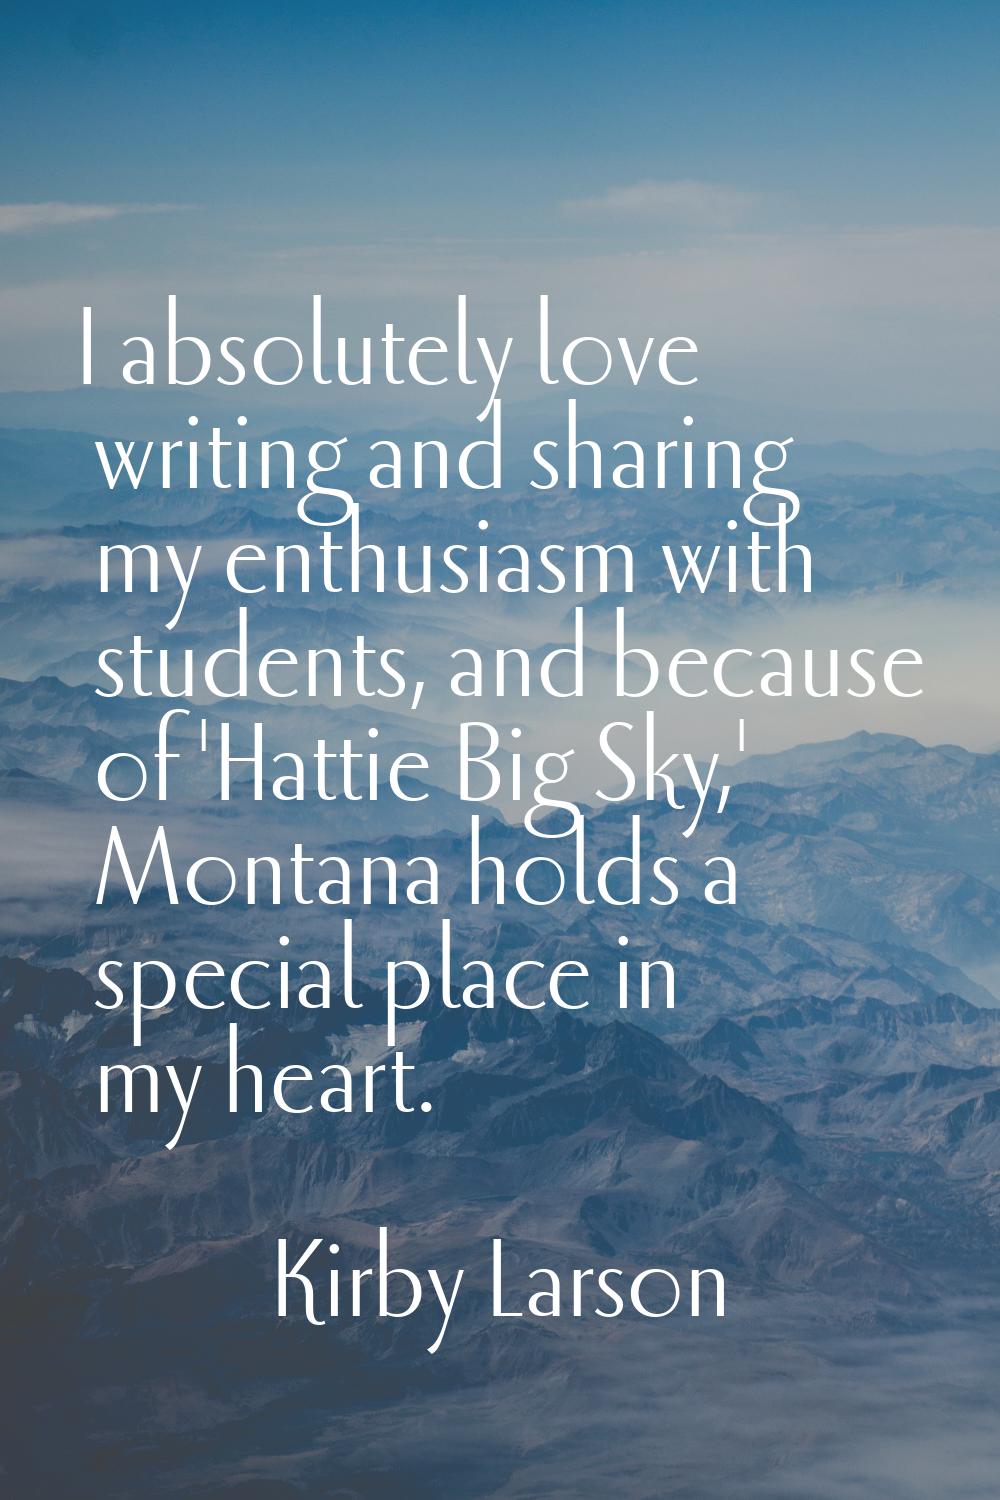 I absolutely love writing and sharing my enthusiasm with students, and because of 'Hattie Big Sky,'